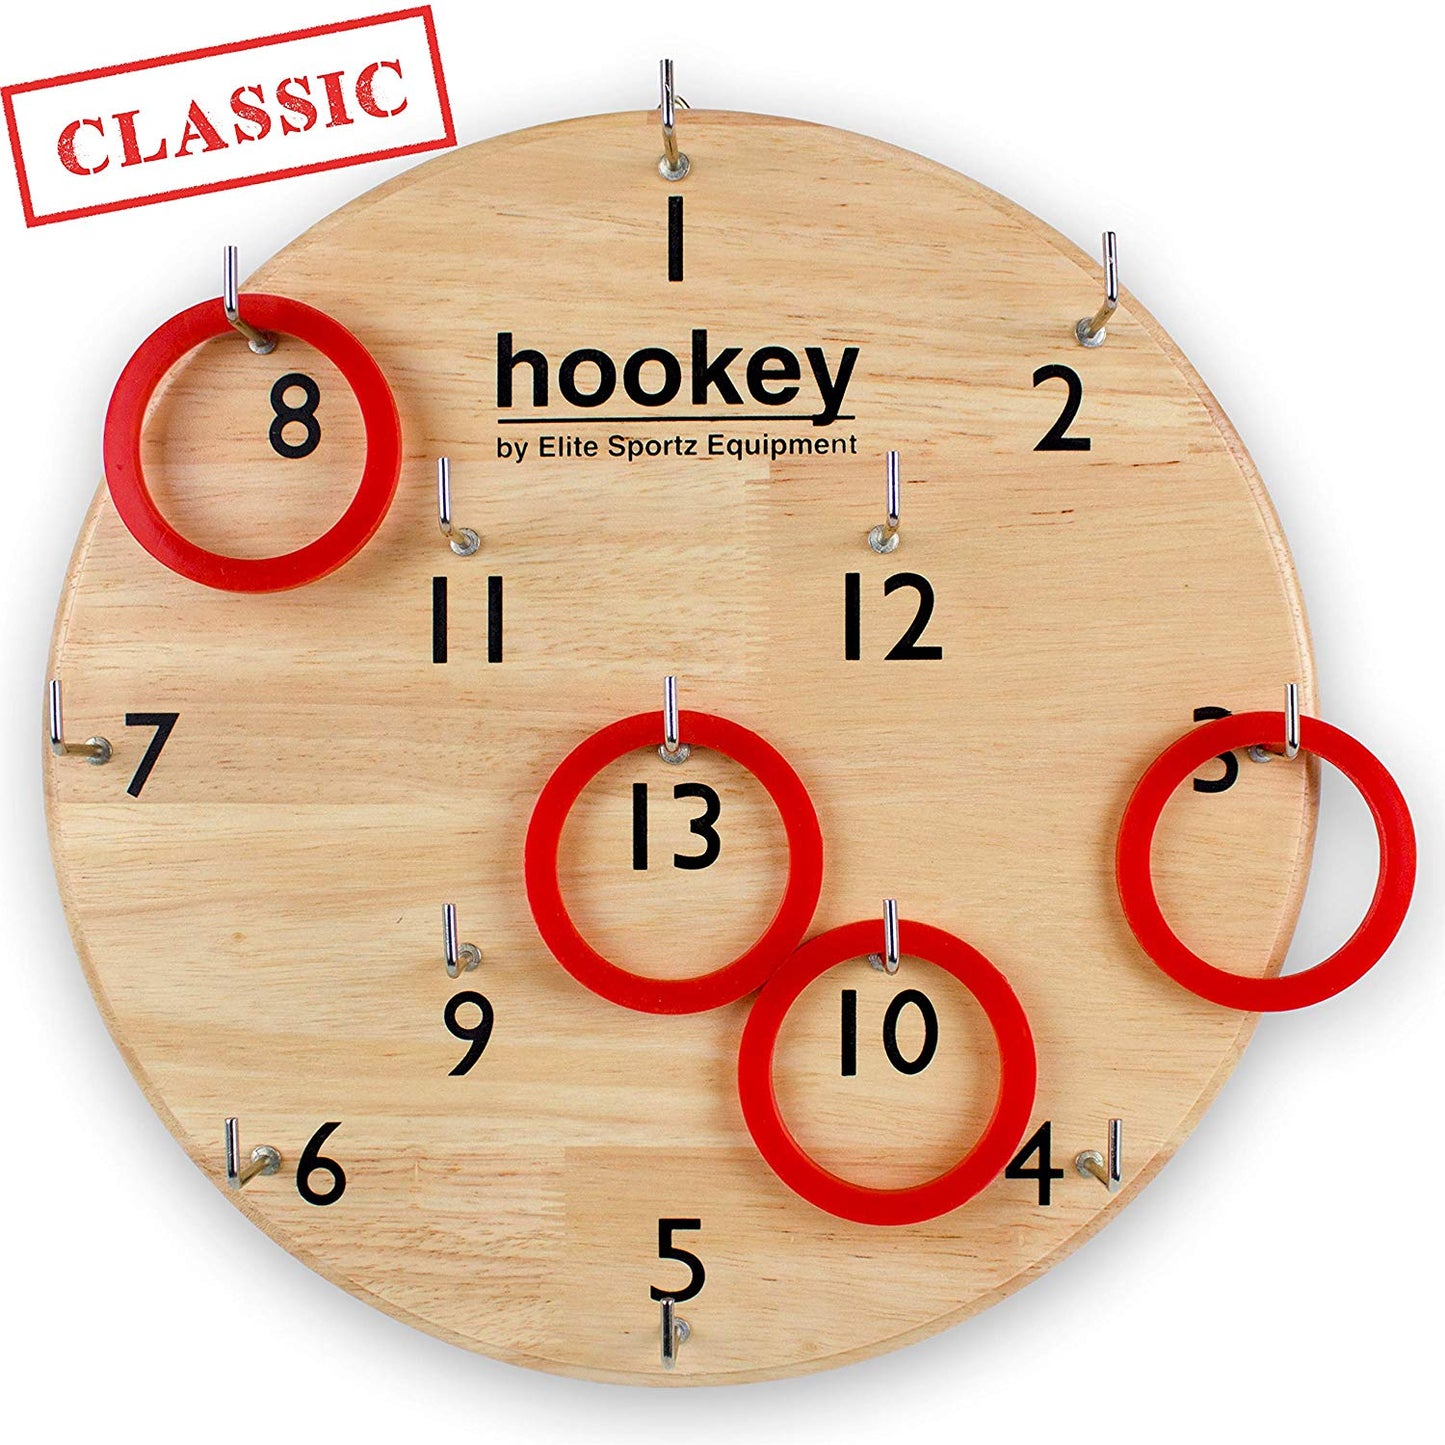 Hookey Ring Toss Game - oddgifts.com